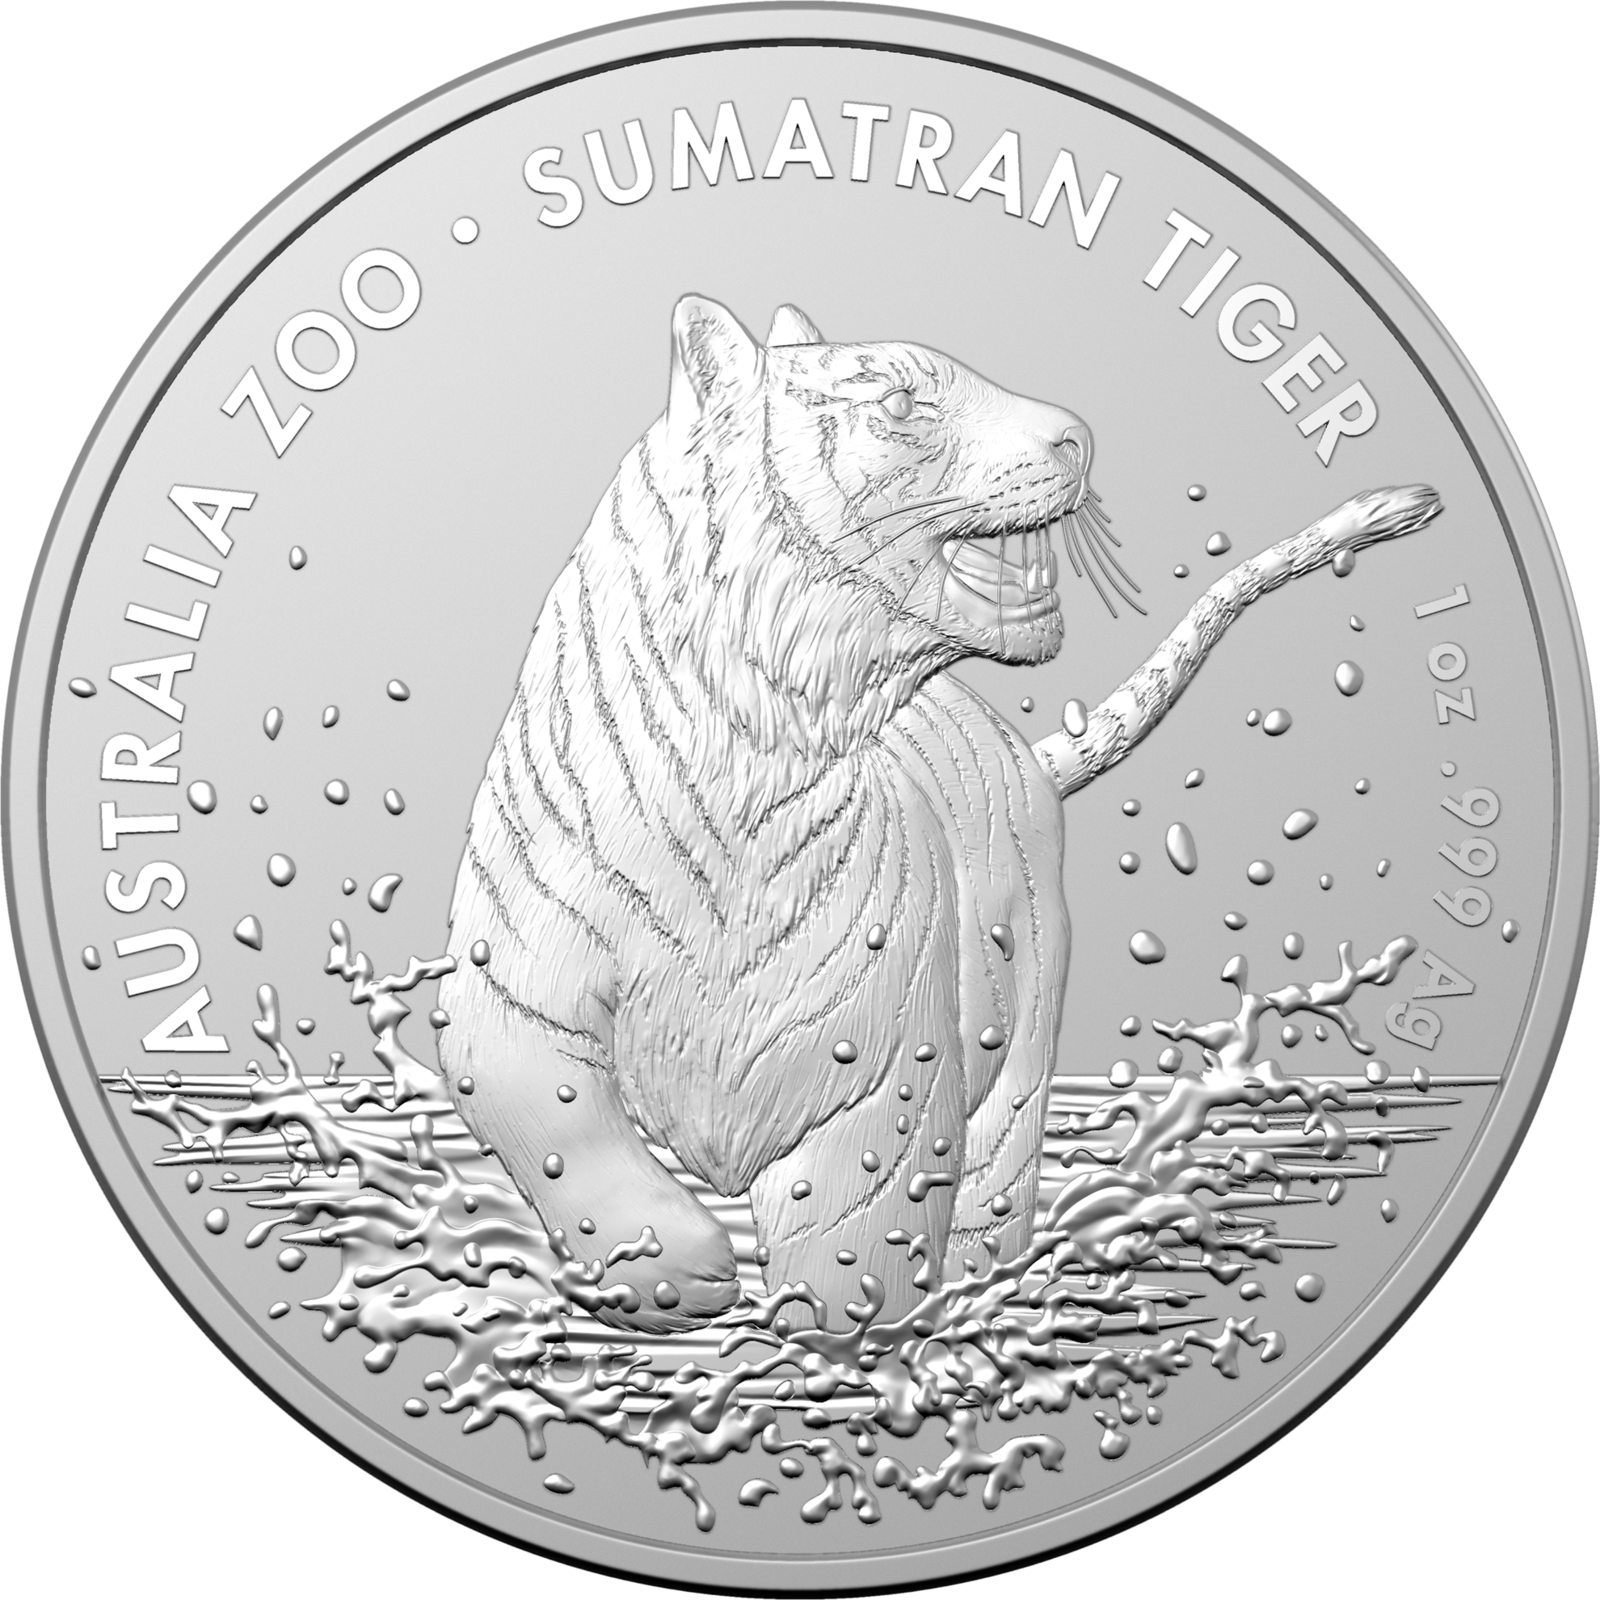 Coins Australia 2020 Australian Zoo Sumatran Tiger 1oz Silver Investment Coin in Capsule only